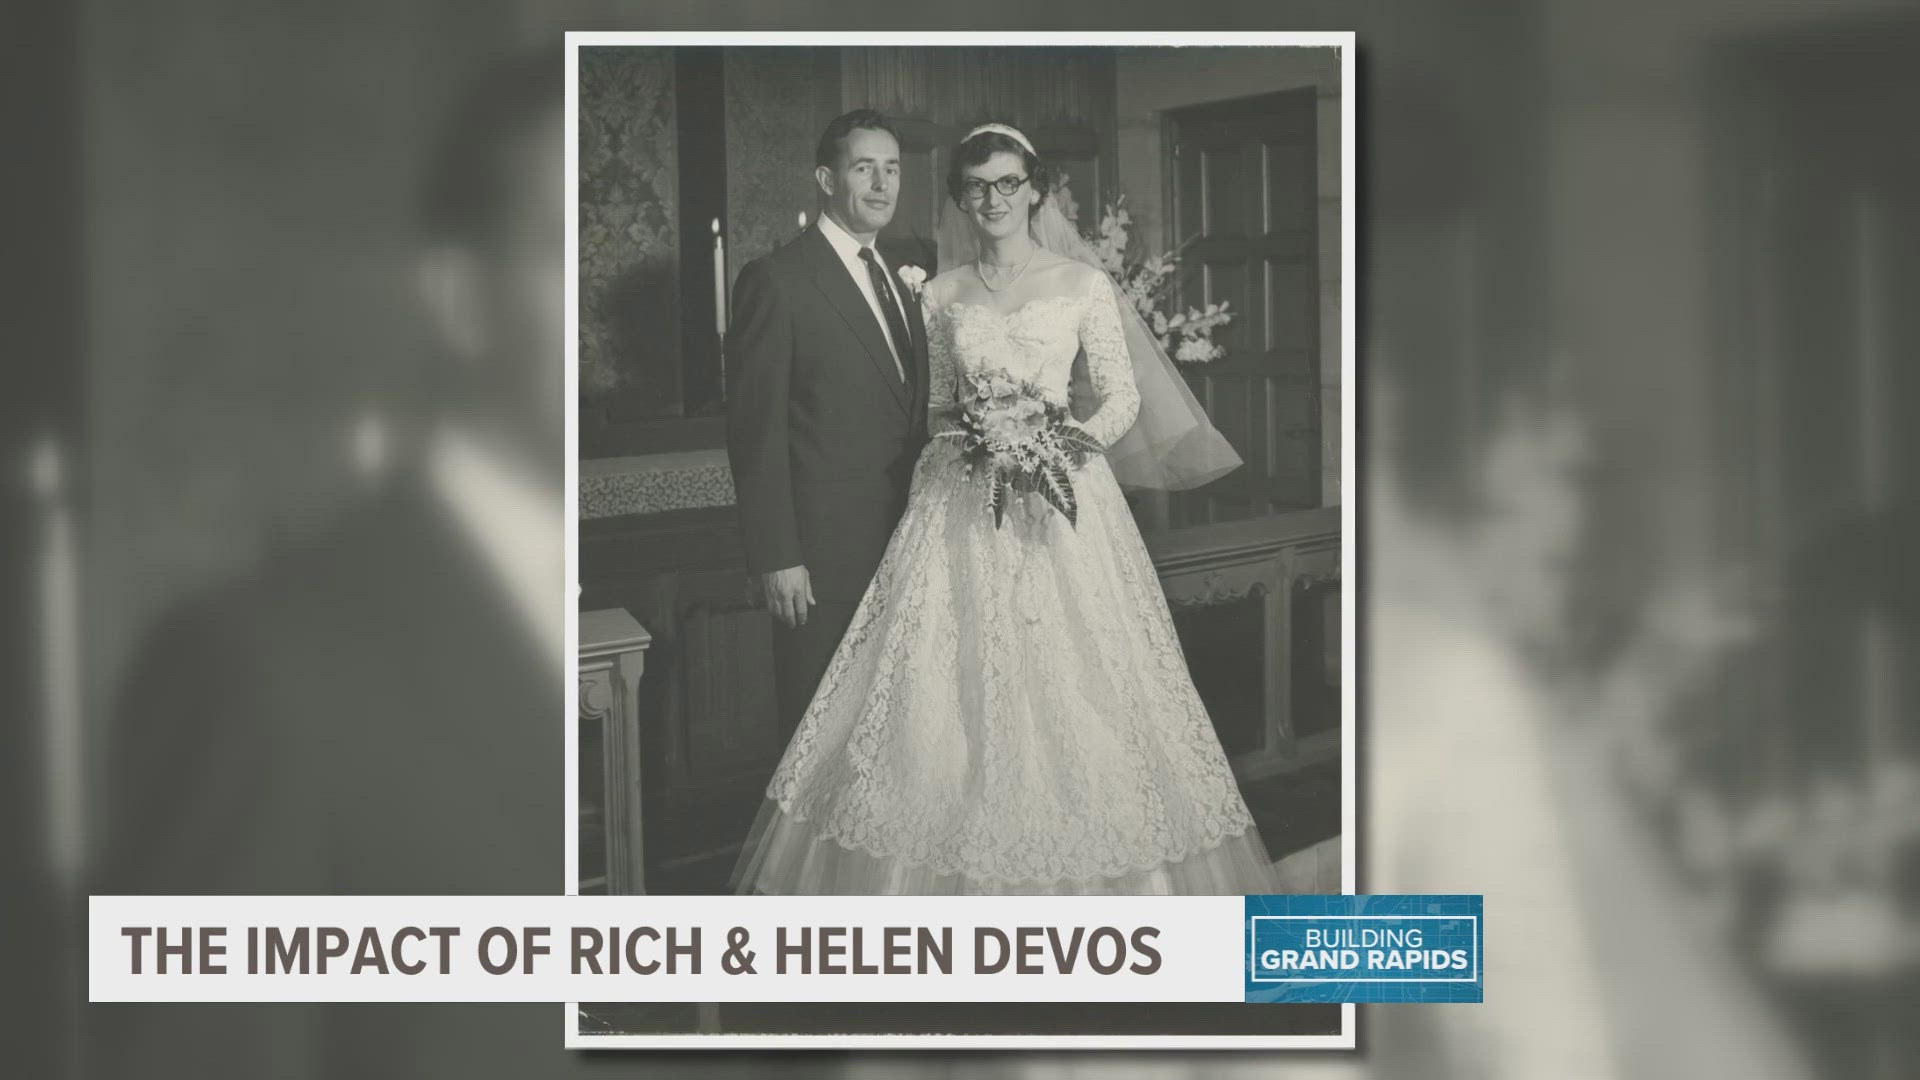 Health care was just one of many areas the Richard and Helen DeVos foundation gave to. There were many others, including education, arts and culture and more.